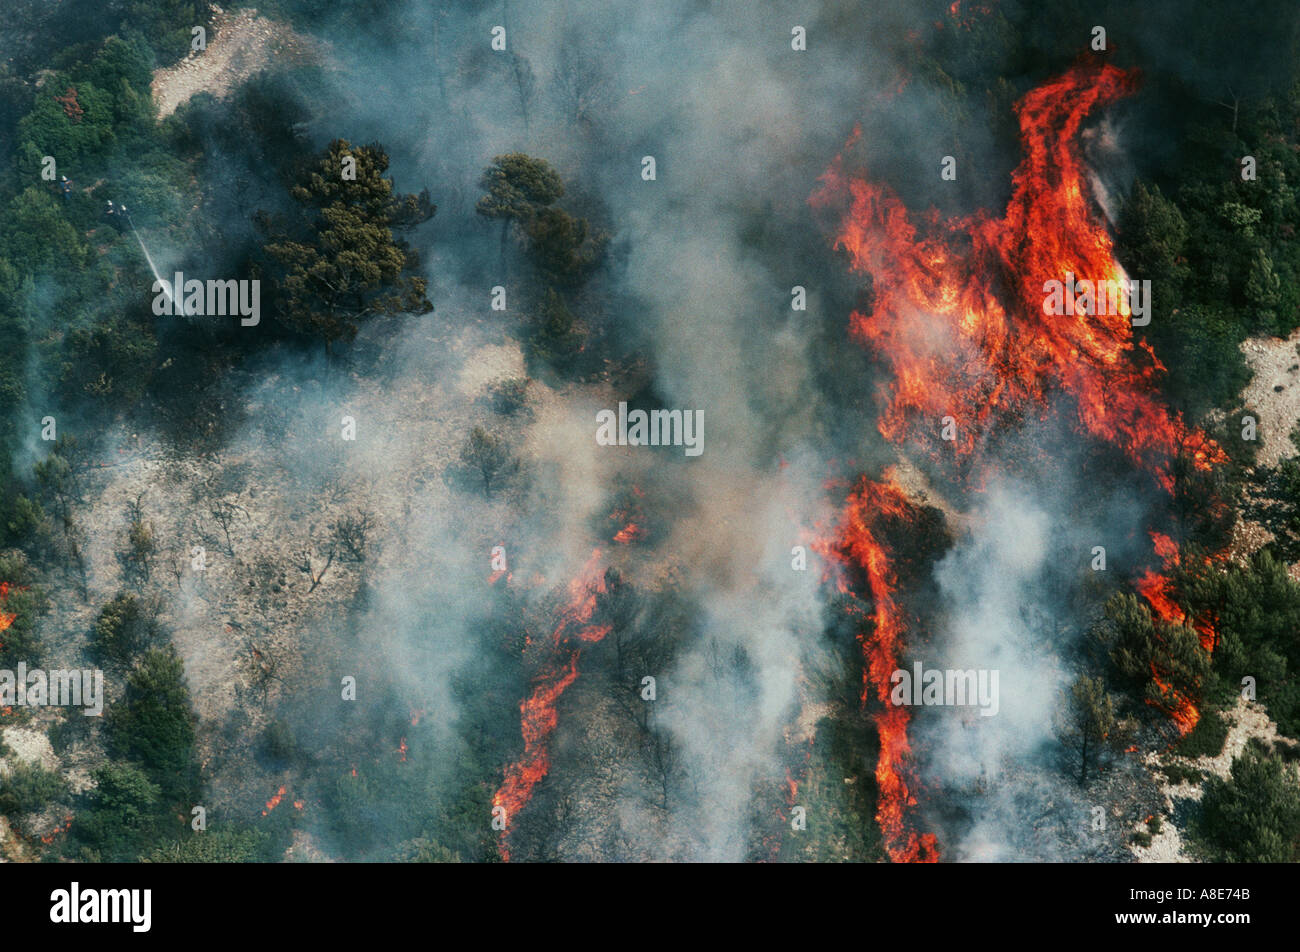 Aerial view of a wildfire, forest fire flames and smoke, Bouches-du-Rhône, Provence, France, Europe, Stock Photo